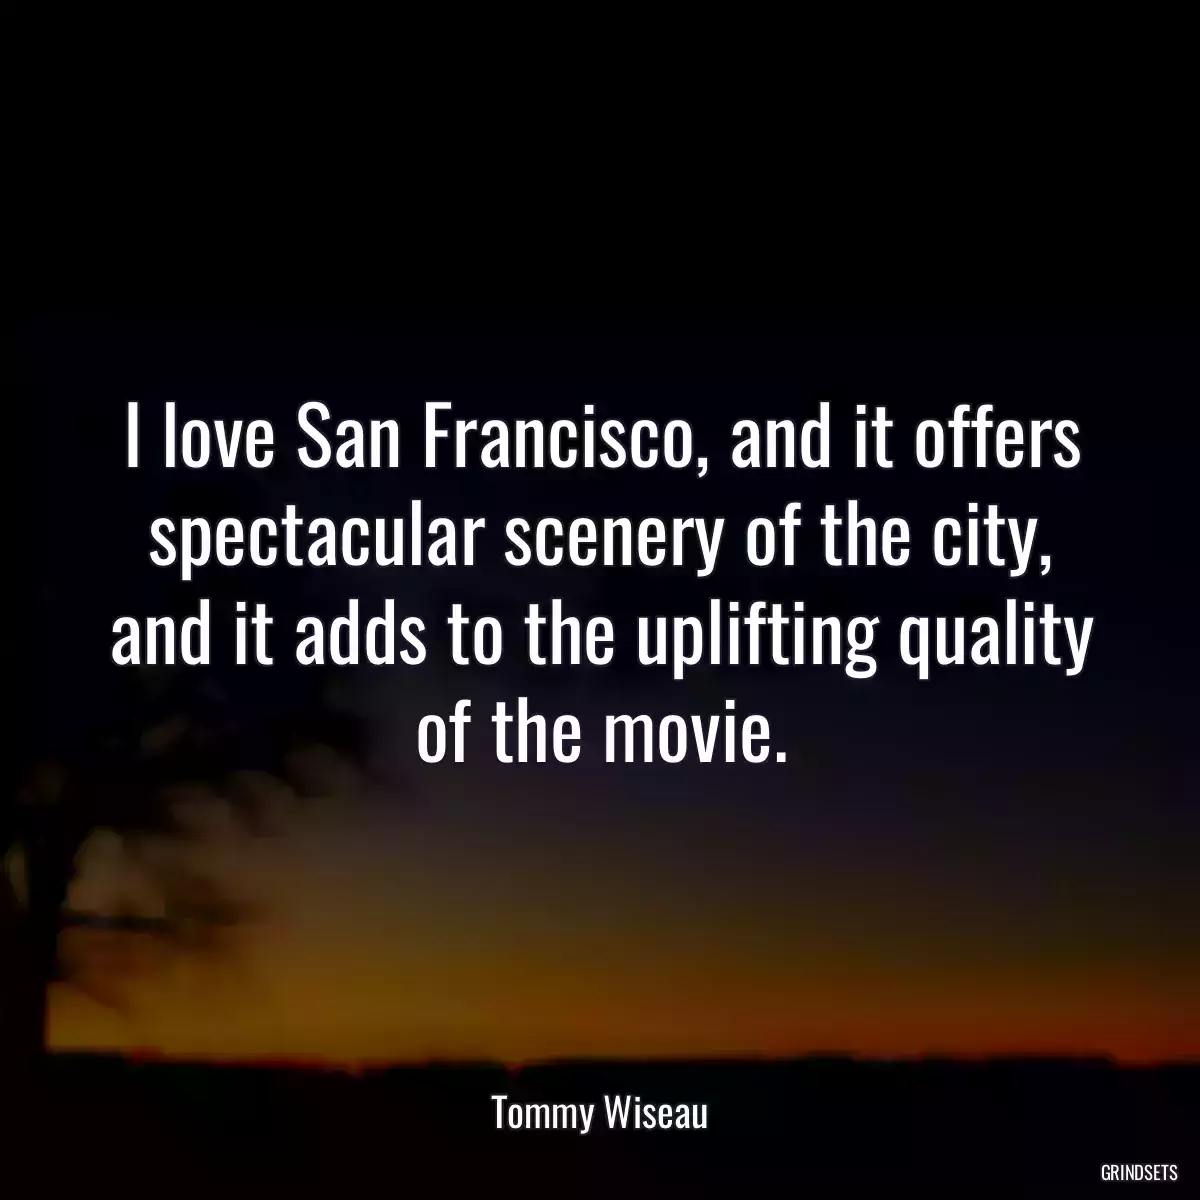 I love San Francisco, and it offers spectacular scenery of the city, and it adds to the uplifting quality of the movie.